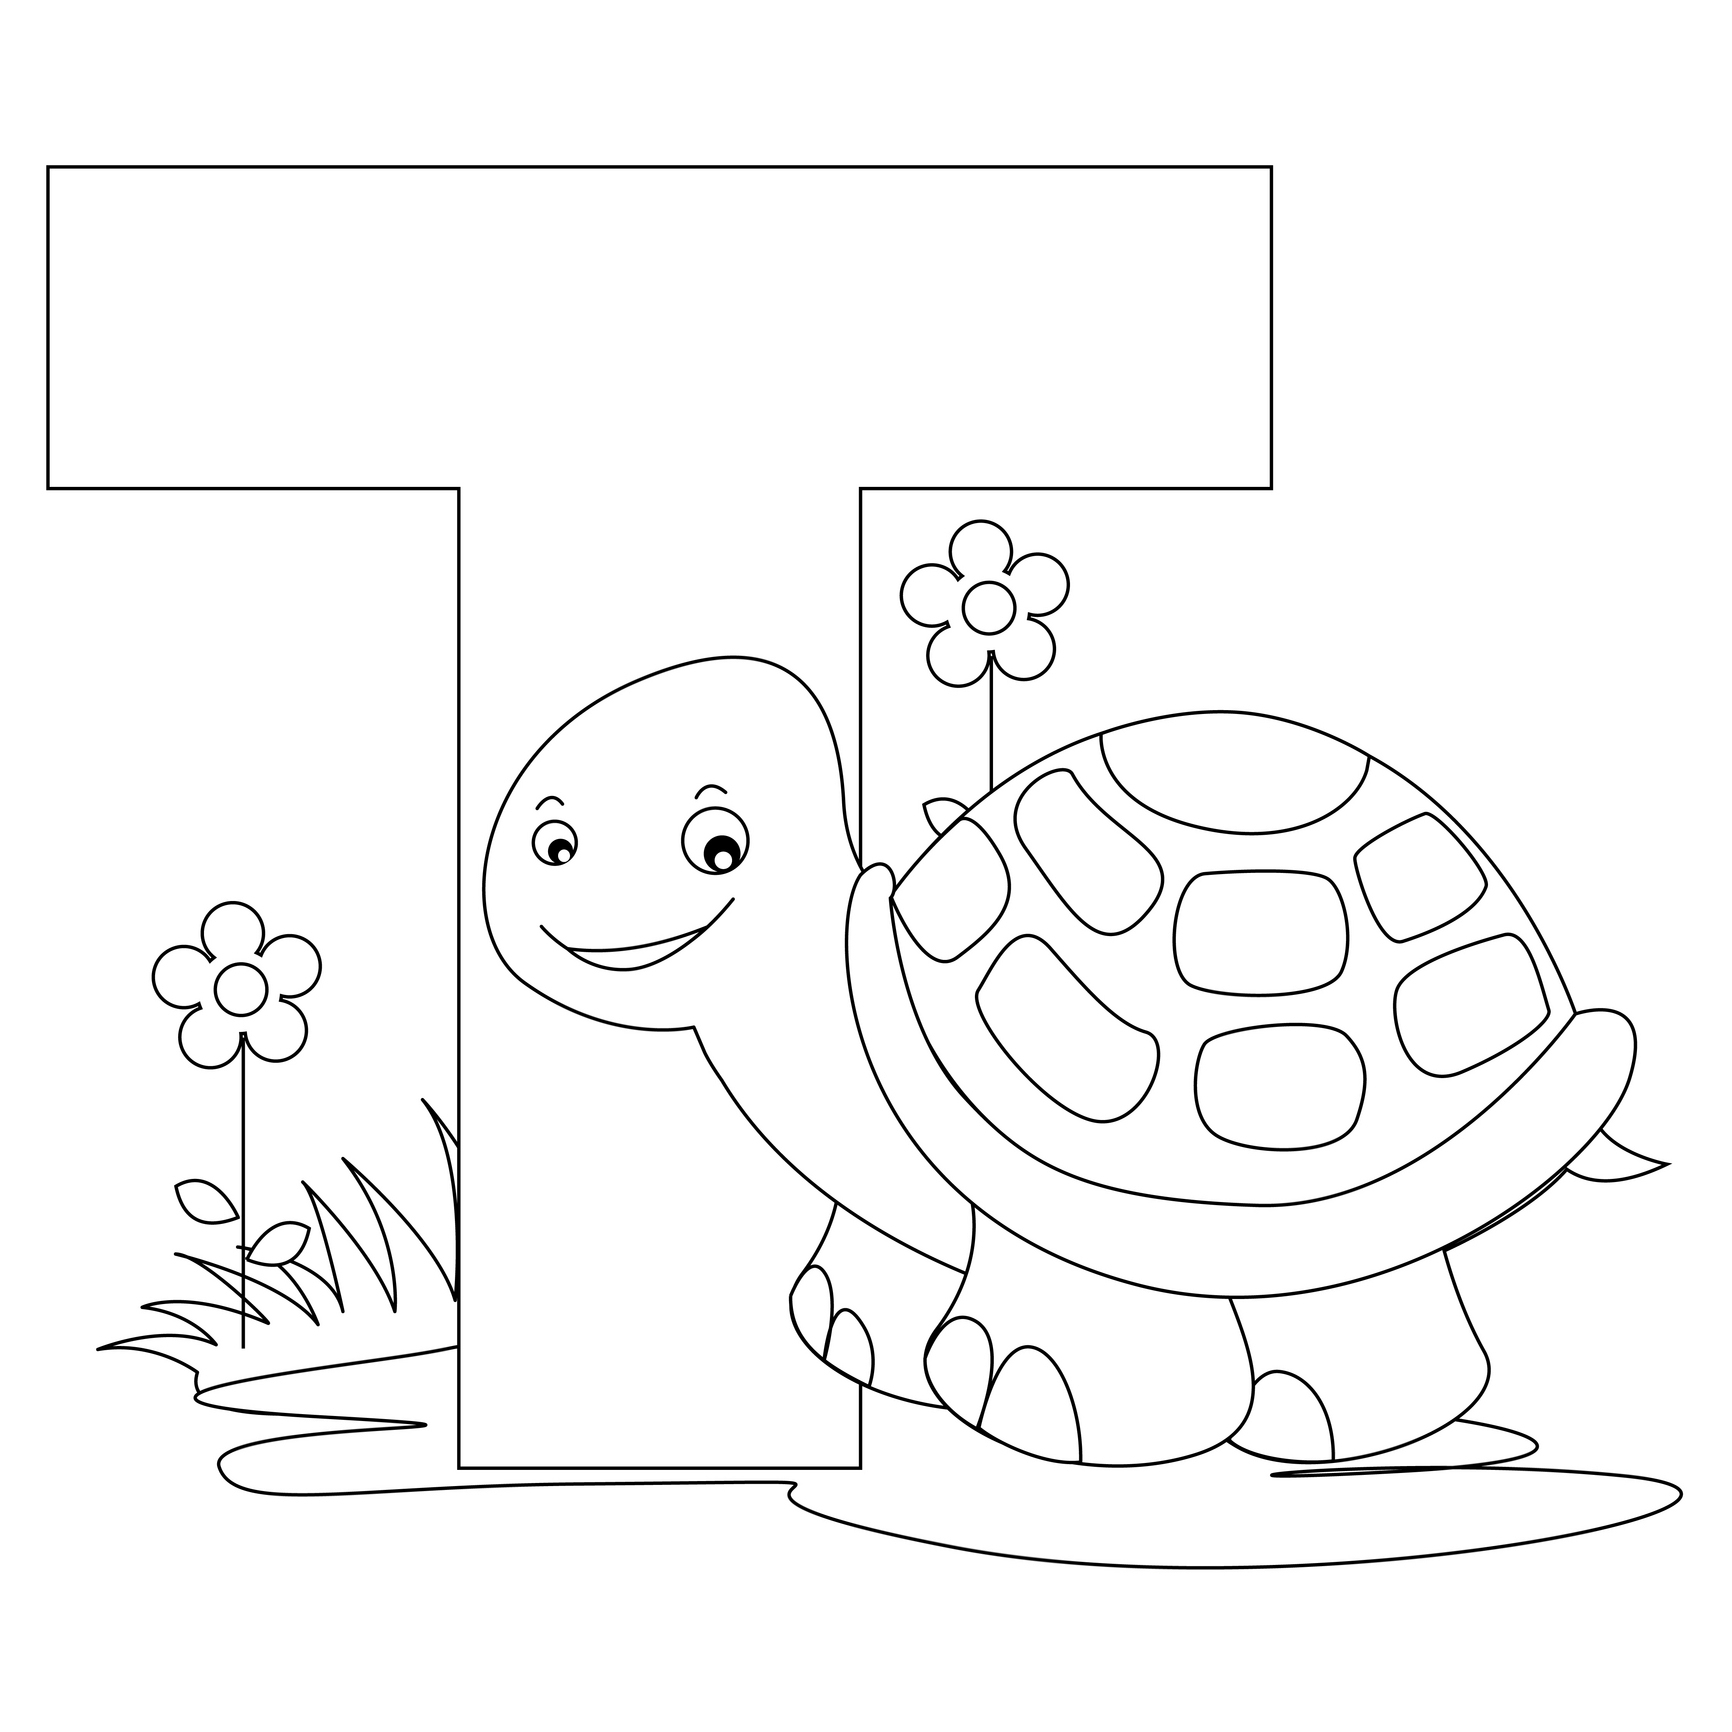 Coloring Pages : Printable Animal Alphabetng Pages Download Them Or - Free Printable Animal Alphabet Letters